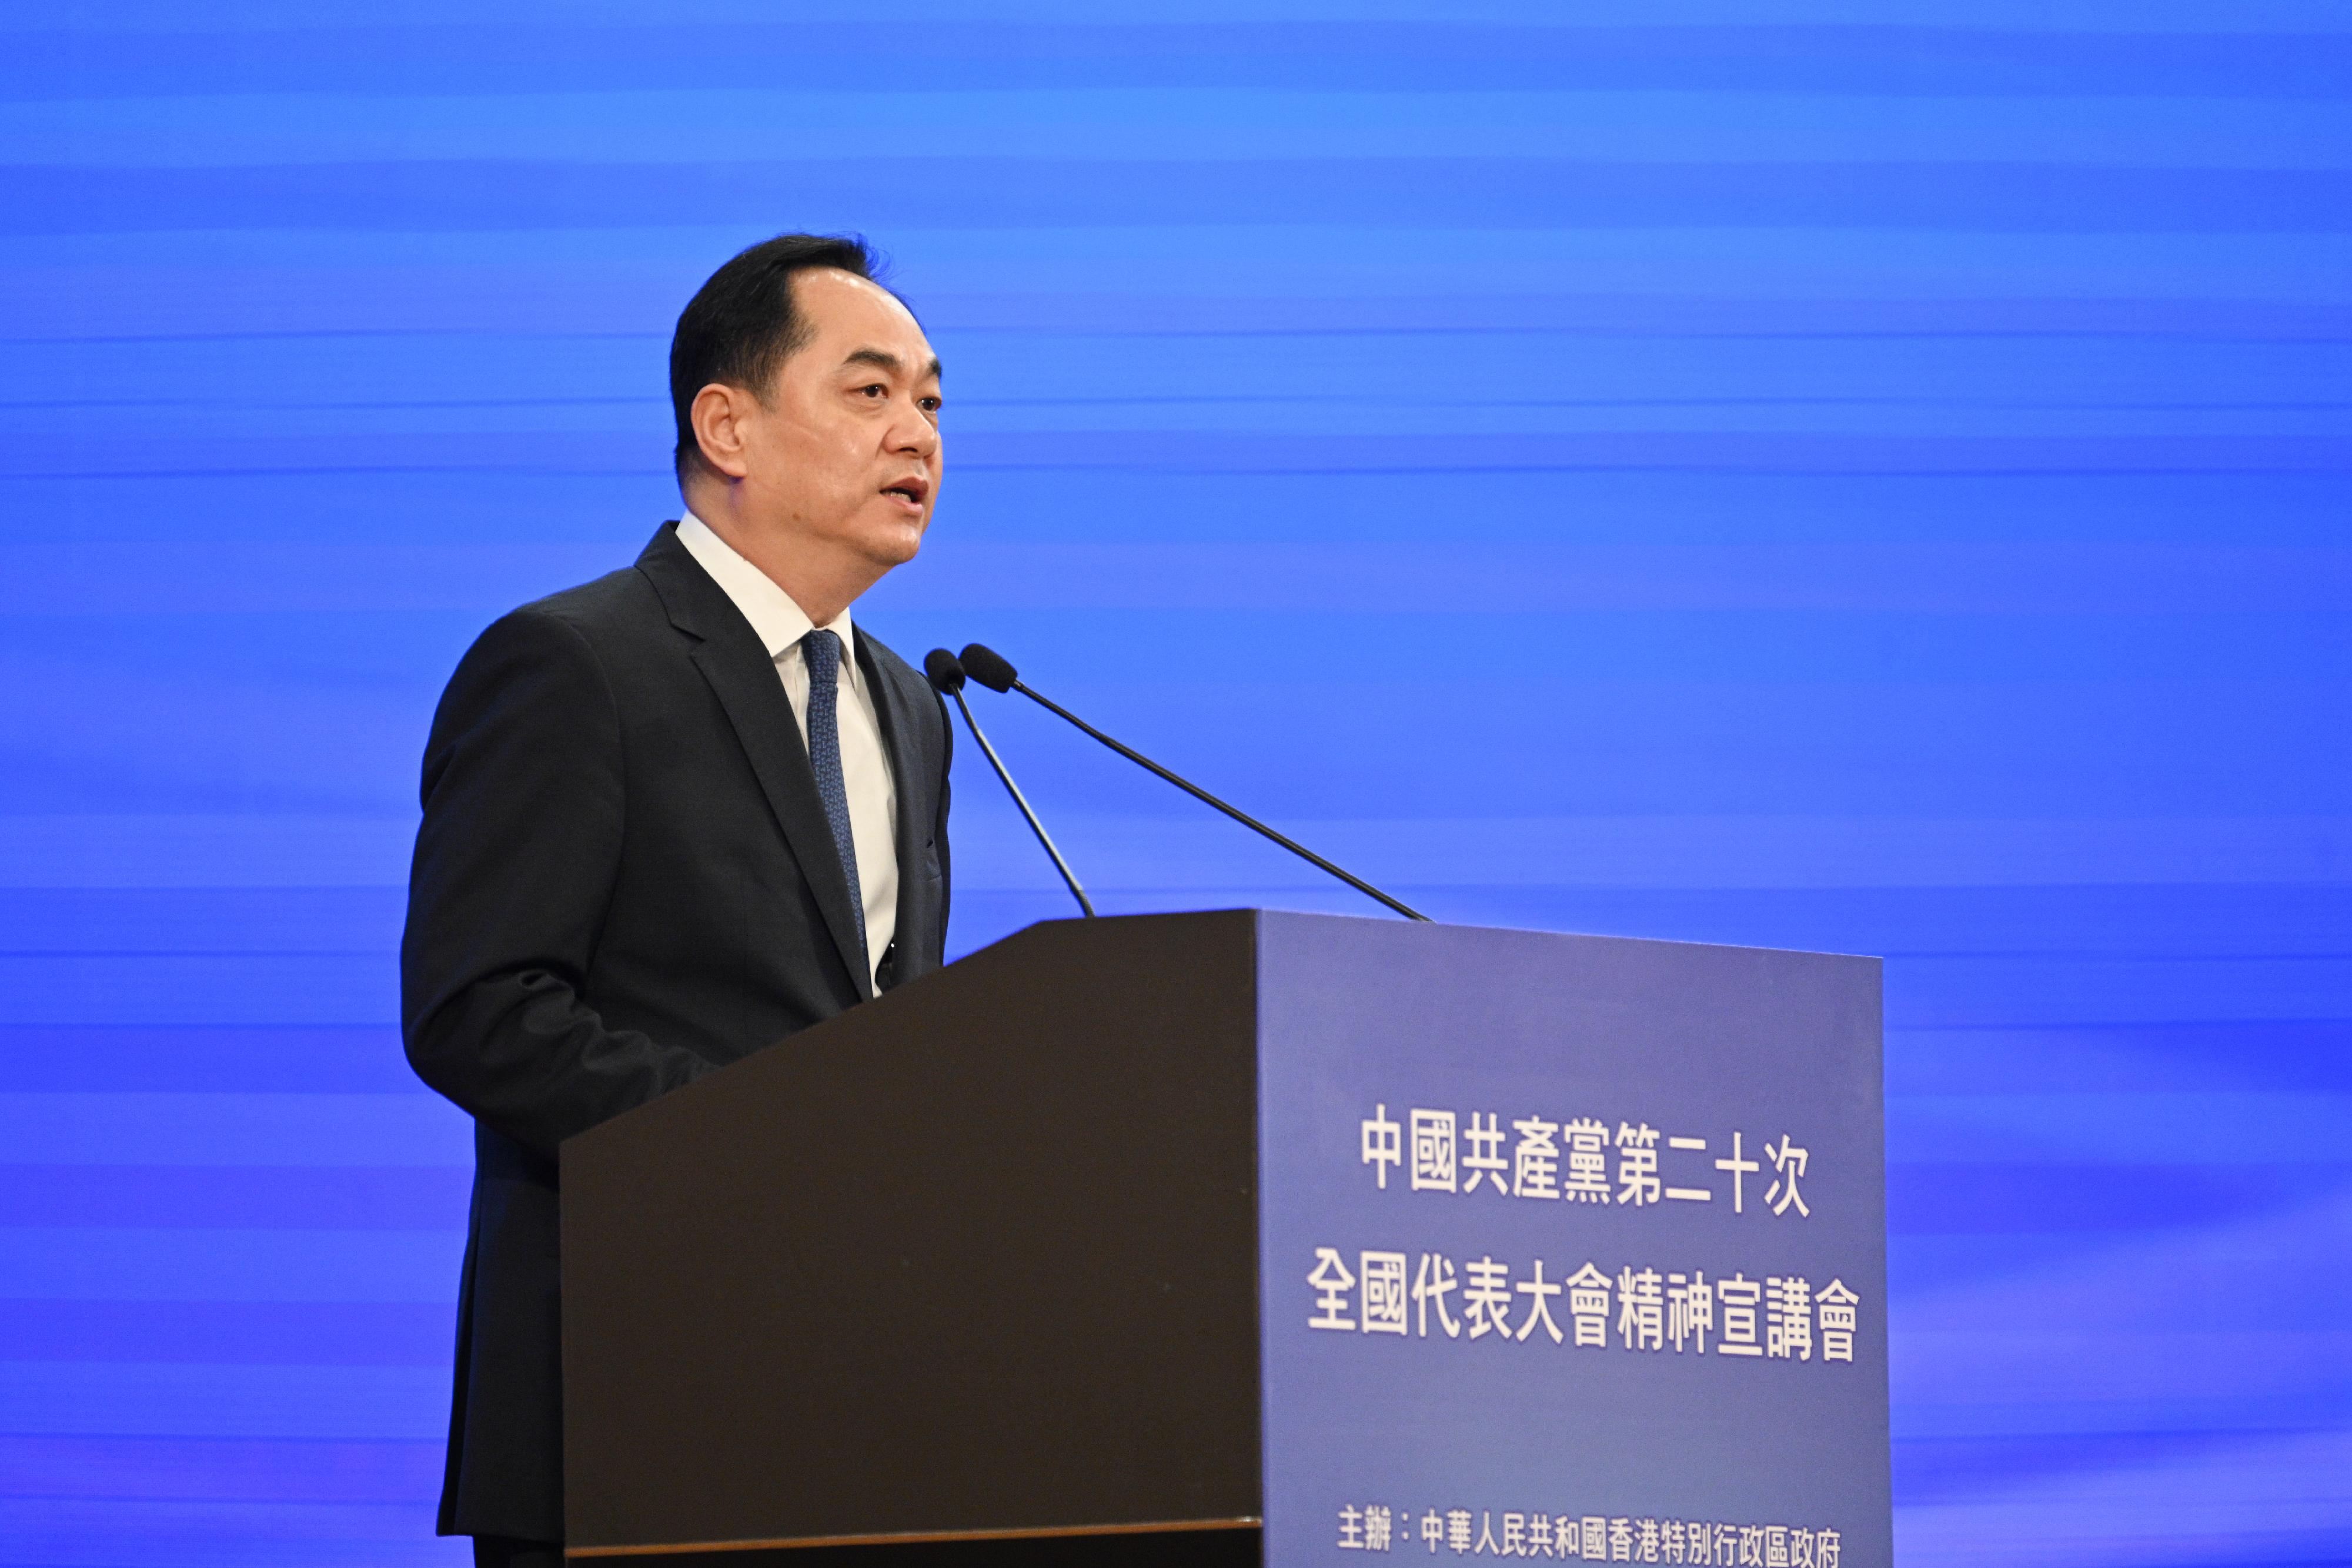 The Hong Kong Special Administrative Region Government held seminars to promote the spirit of the 20th National Congress of the CPC at the Hong Kong Convention and Exhibition Centre, Wan Chai today (December 3). Photo shows Deputy Director of the Hong Kong and Macao Affairs Office of the State Council, Mr Yang Wanming, speaking at the seminar.
